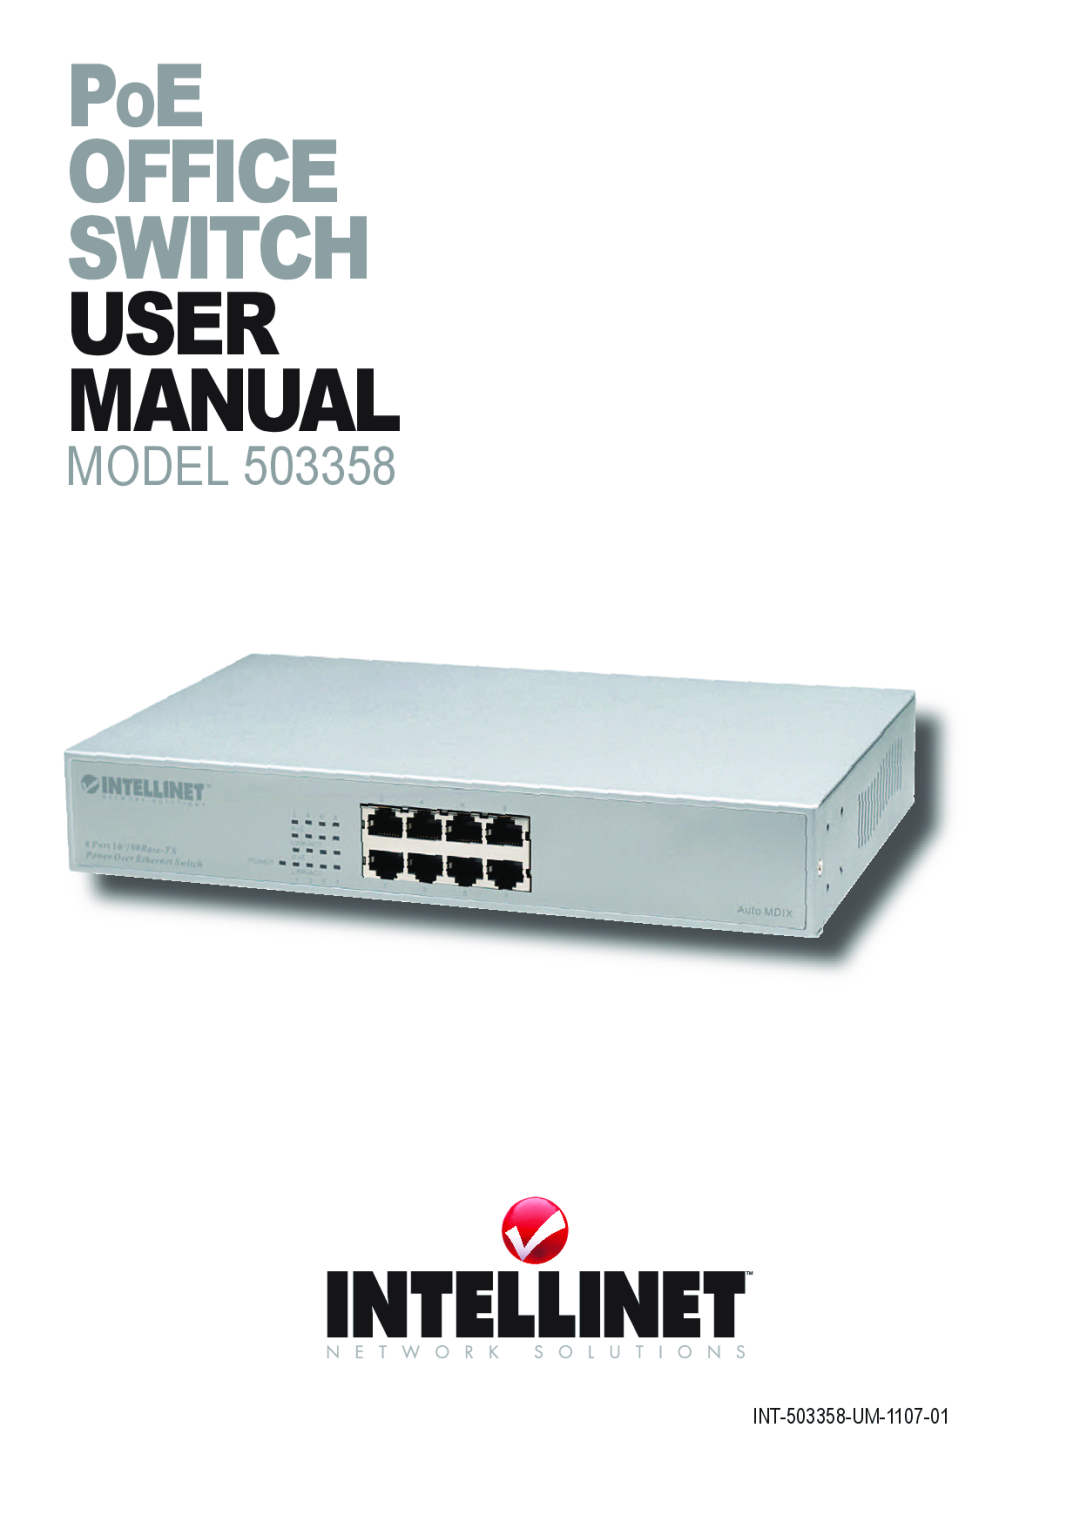 Intellinet Network Solutions user manual PoE Office Switch user manual, Model, INT-503358-UM-1107-01 